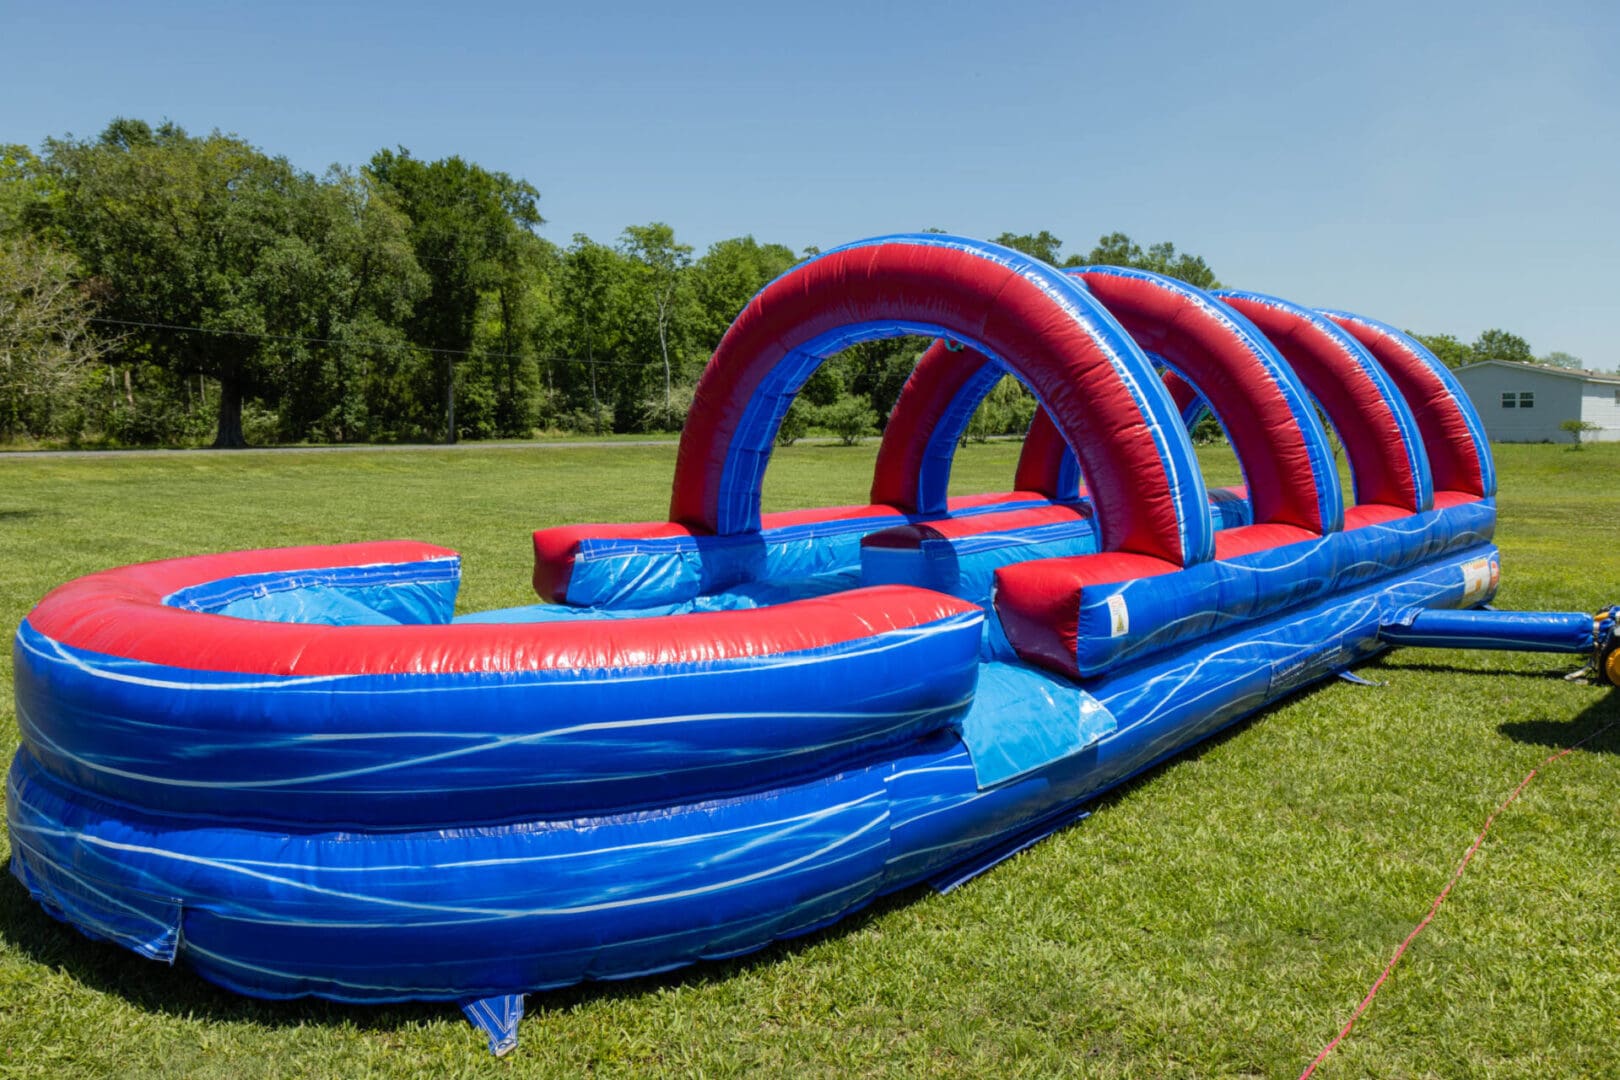 A long inflatable water slide in the grass.